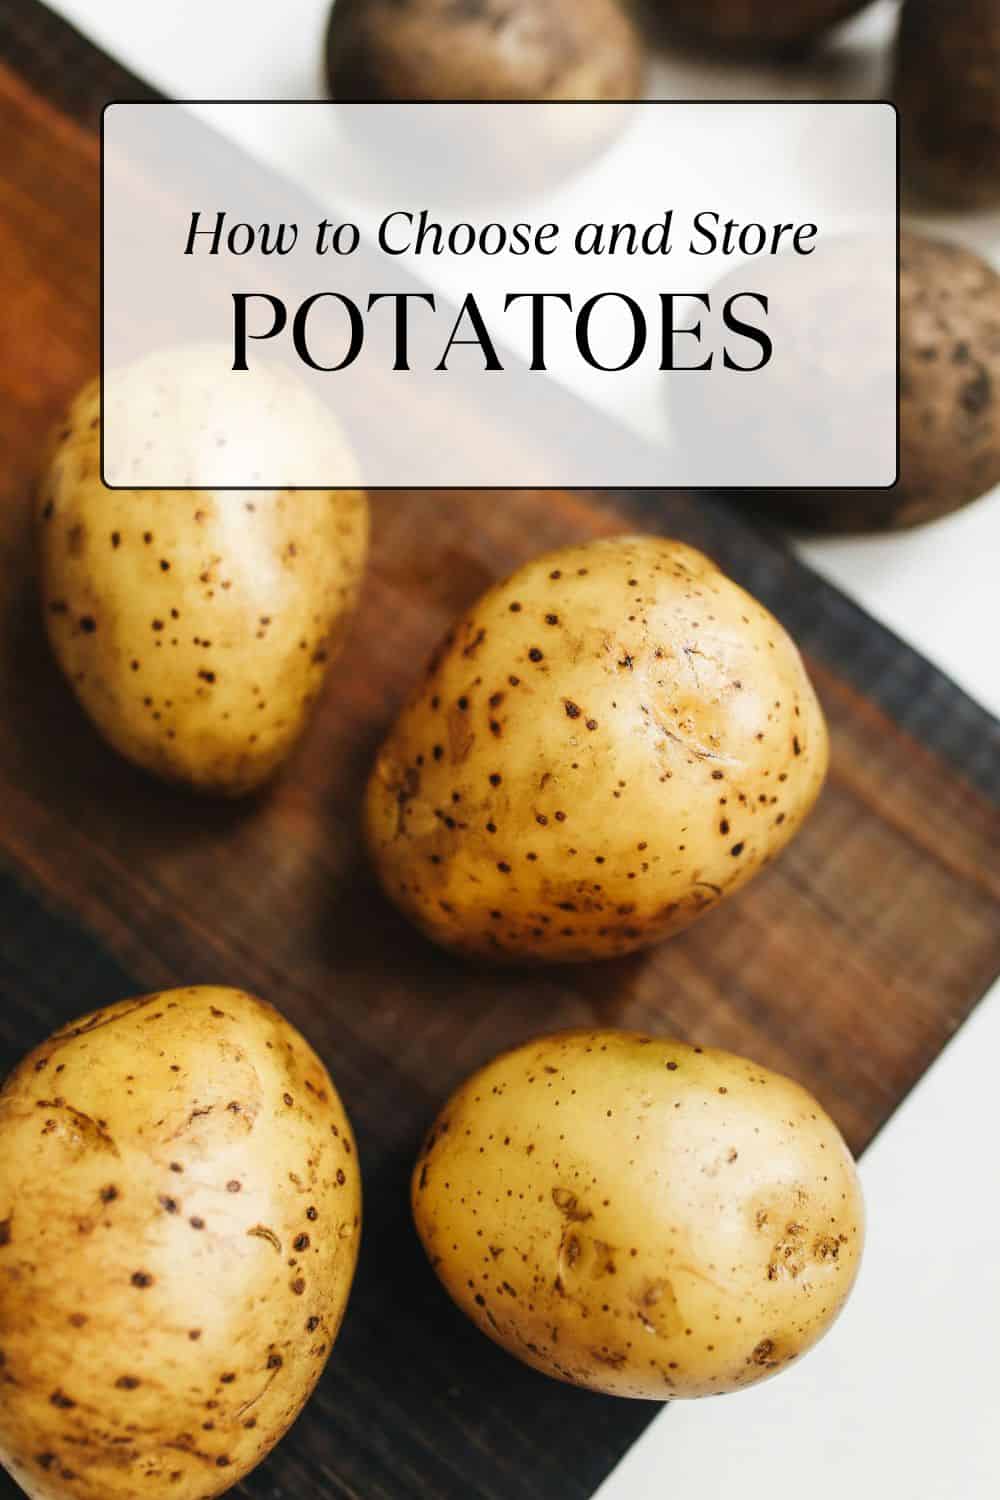 Potatoes on cutting board with text overlay: How to choose and store potatoes